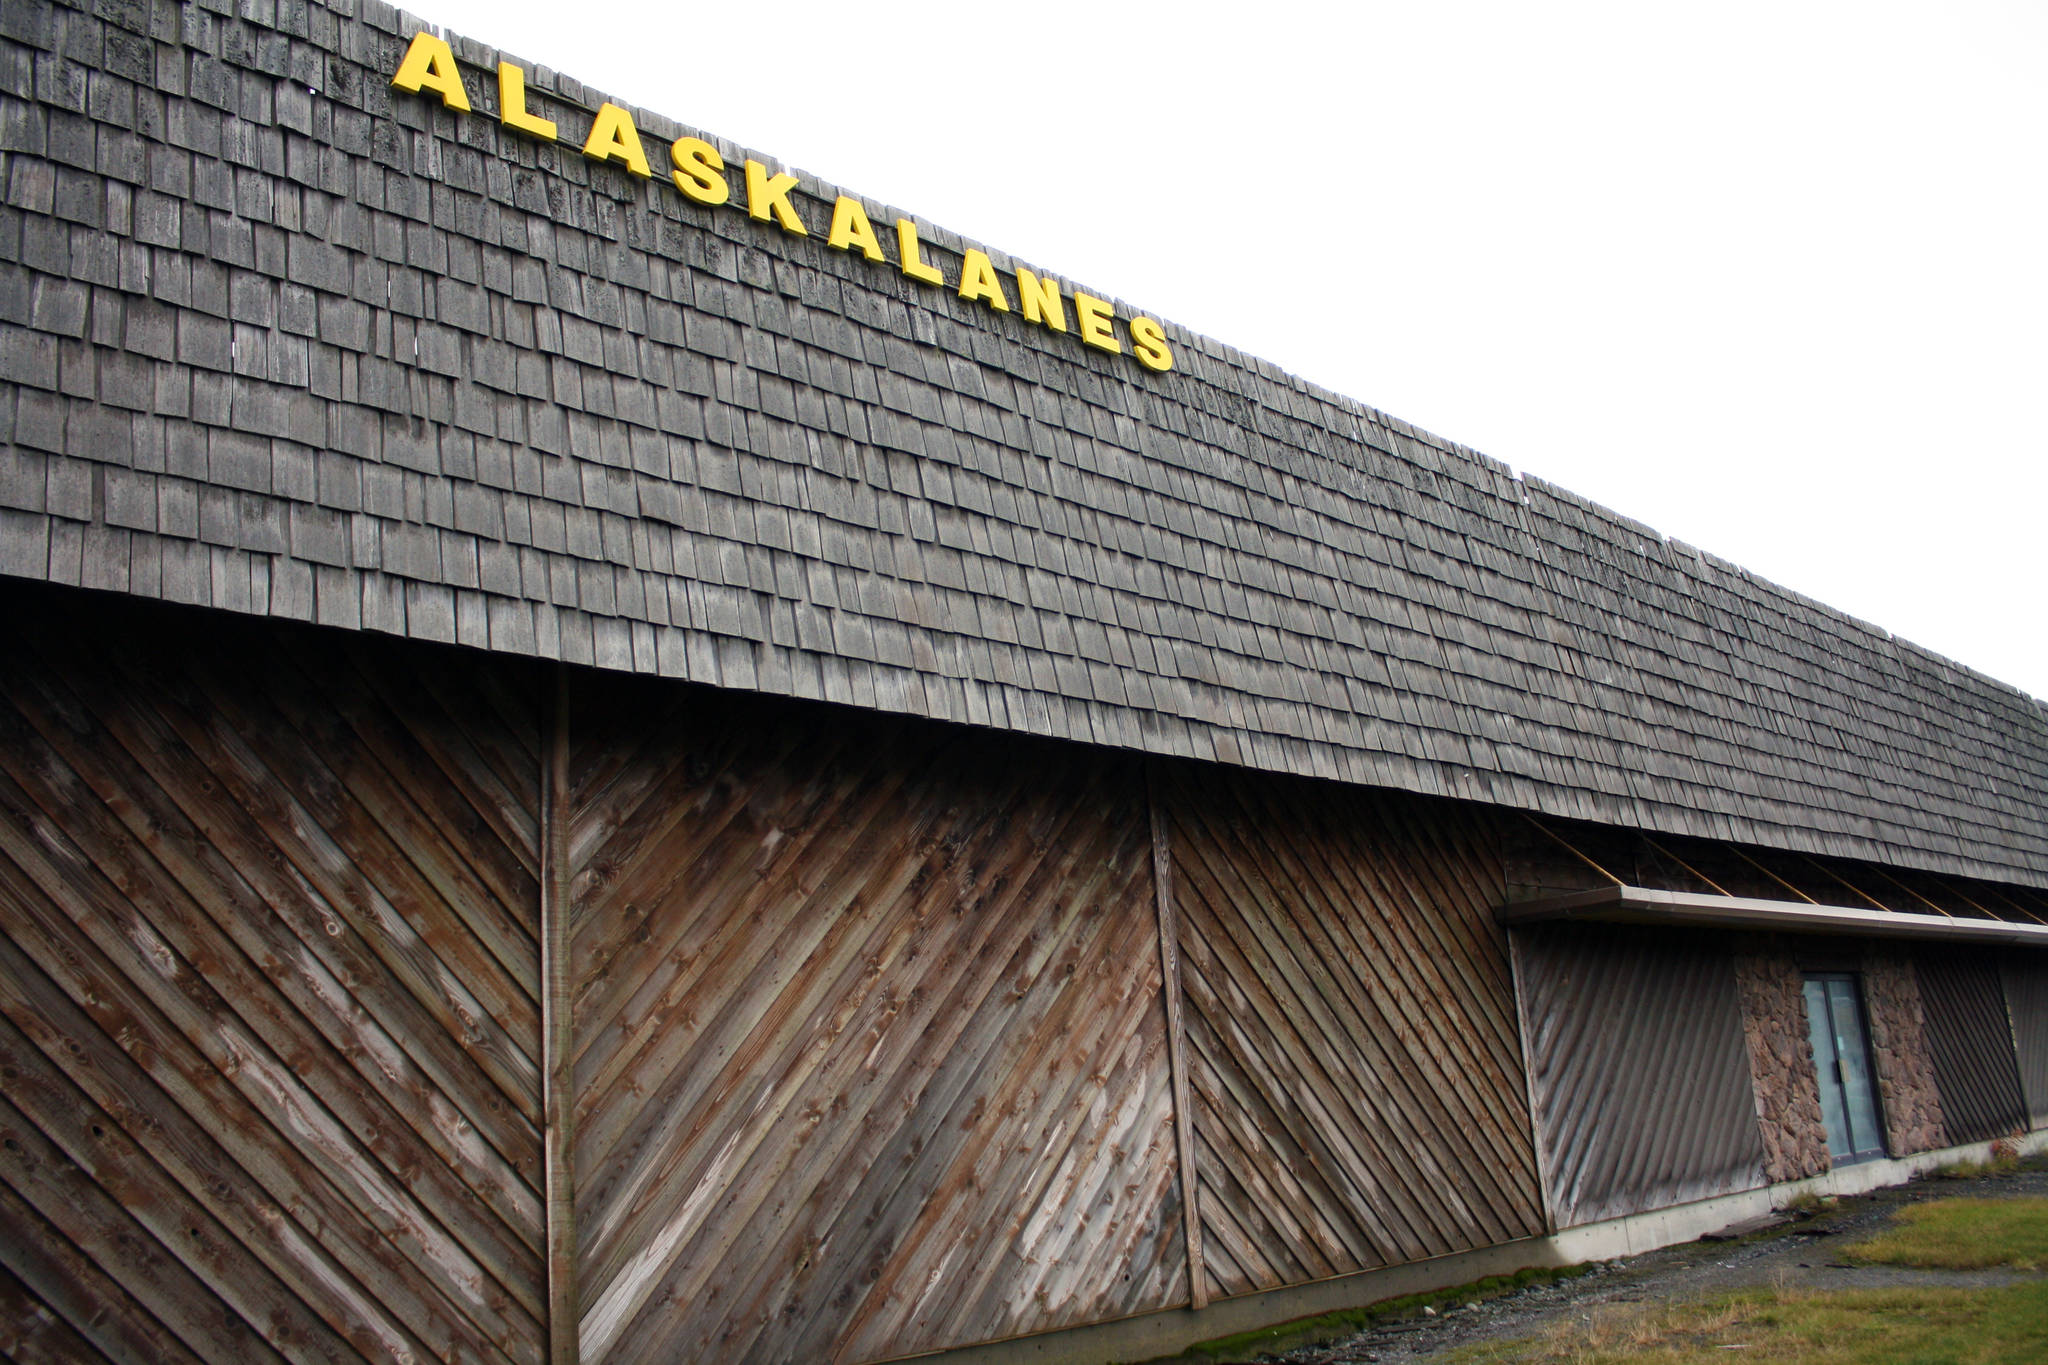 Alaskalanes bowling alley is photographed on Thursday, Oct. 4, 2018 in Kenai, Alaska. New owners have asked Kenai City Council to help reopen the business, which closed in 2015. (Photo by Erin Thompson/Peninsula Clarion)